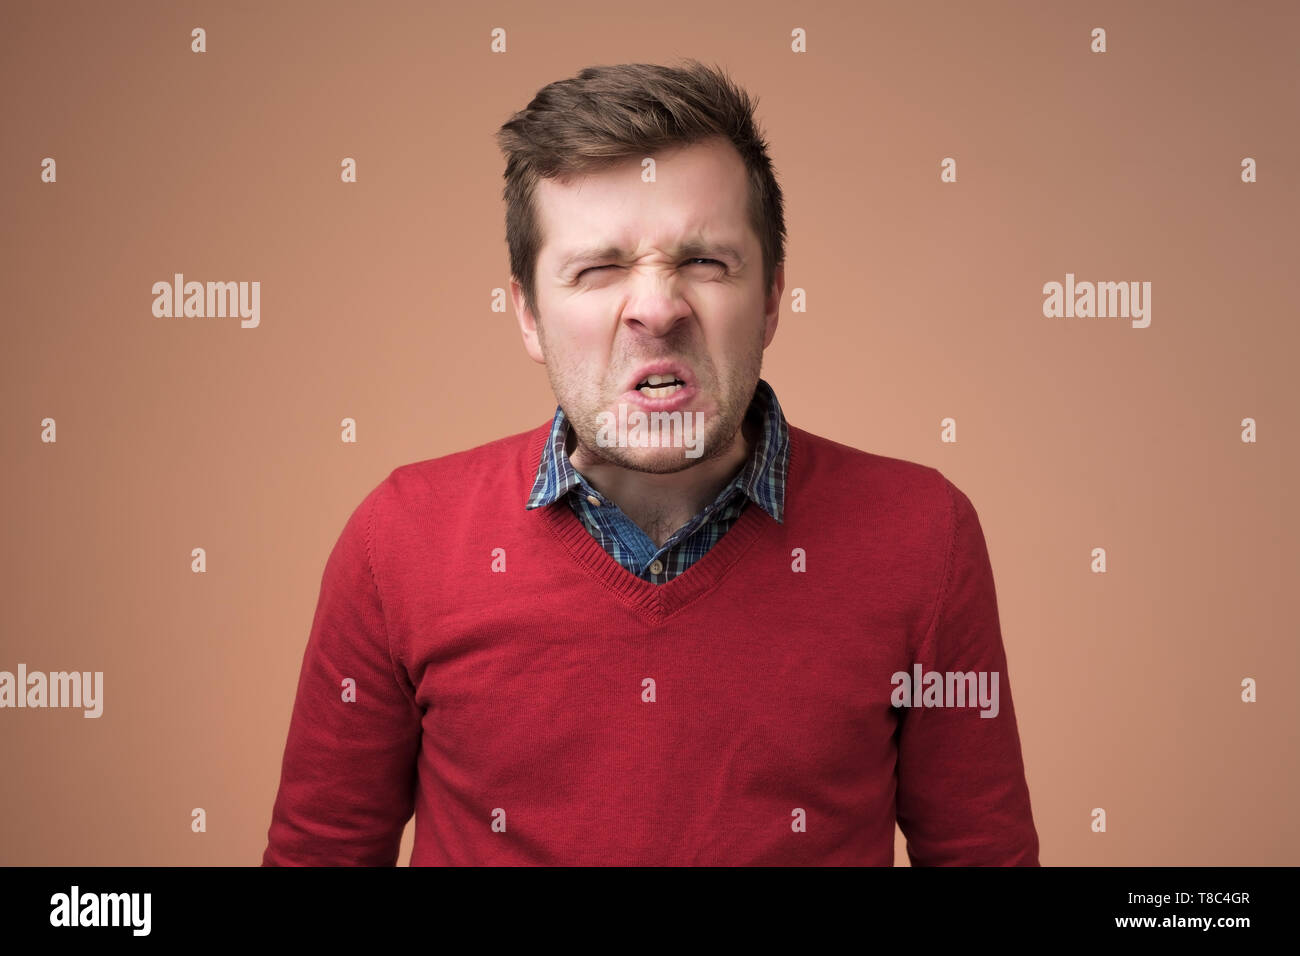 Angry caucasian man frowning his face in furious expression. Stock Photo